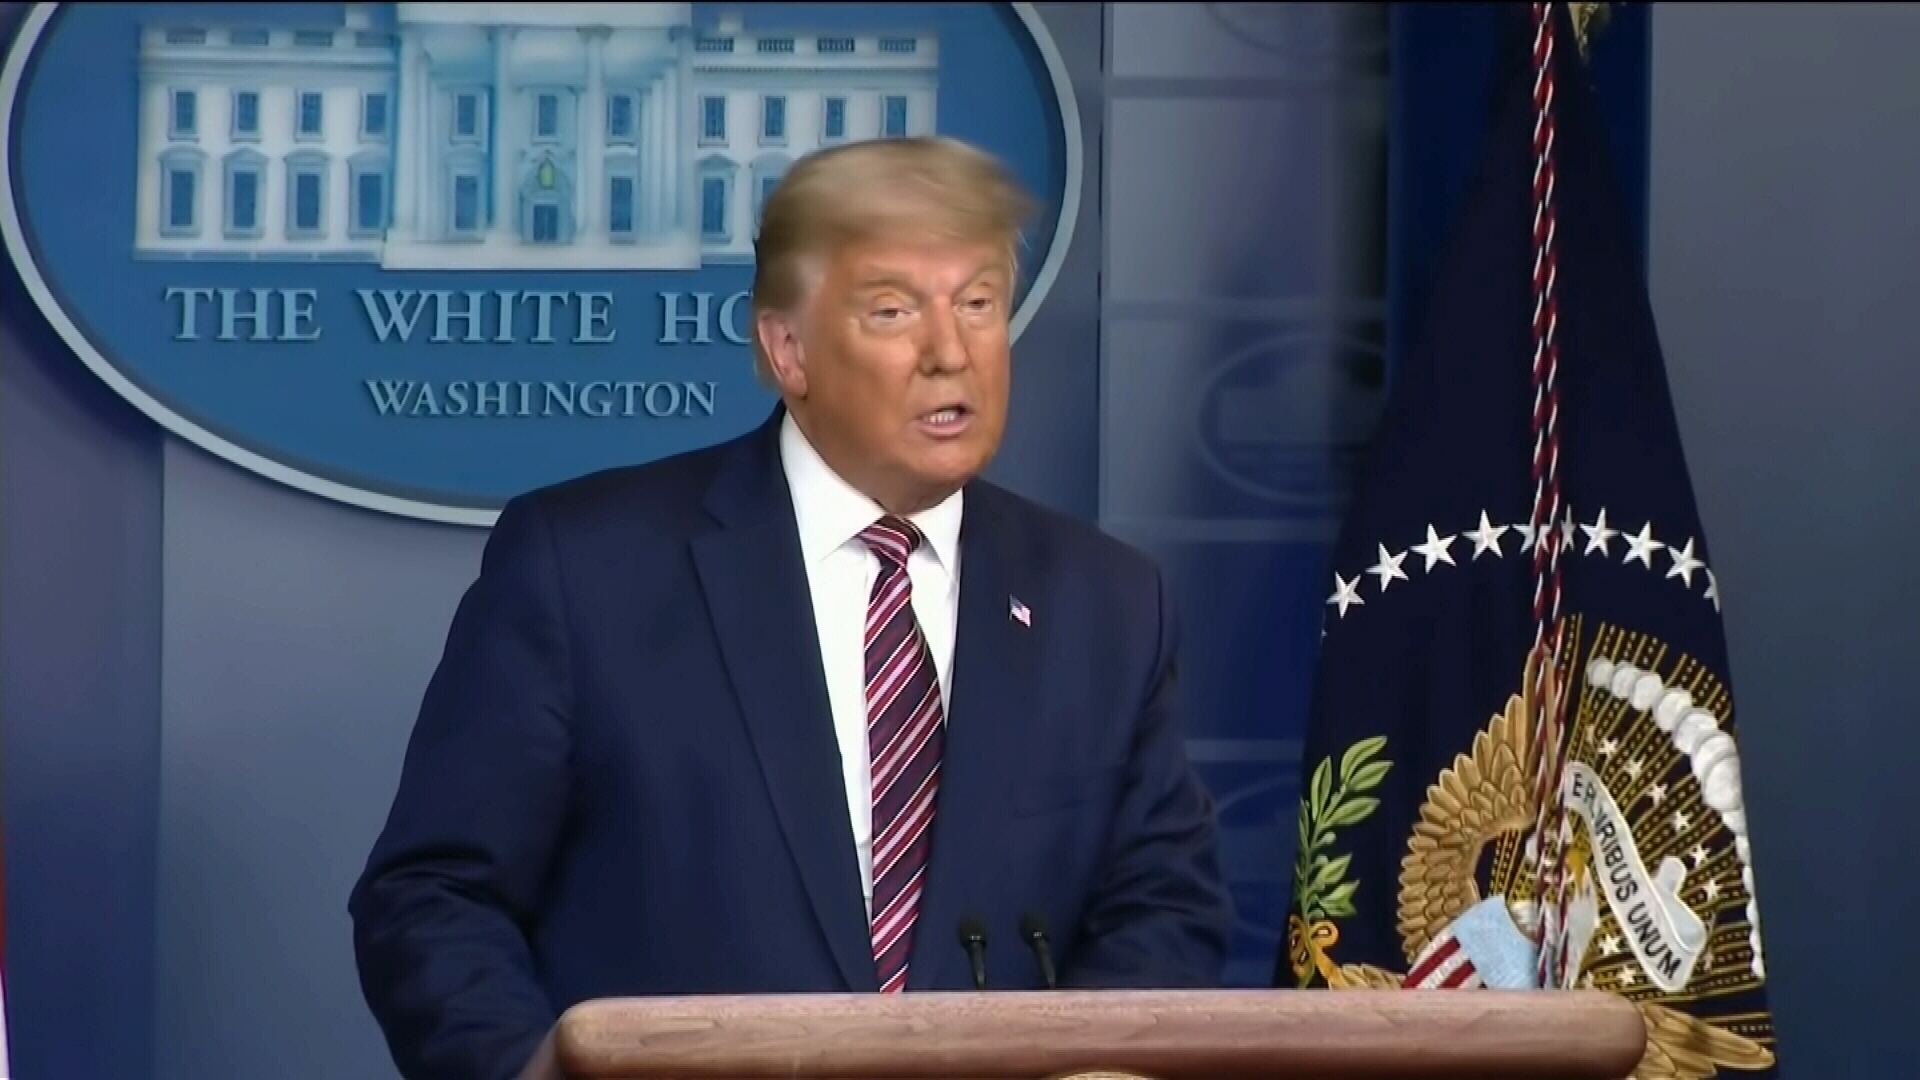 US President Donald Trump giving an address on Thursday night, local time.